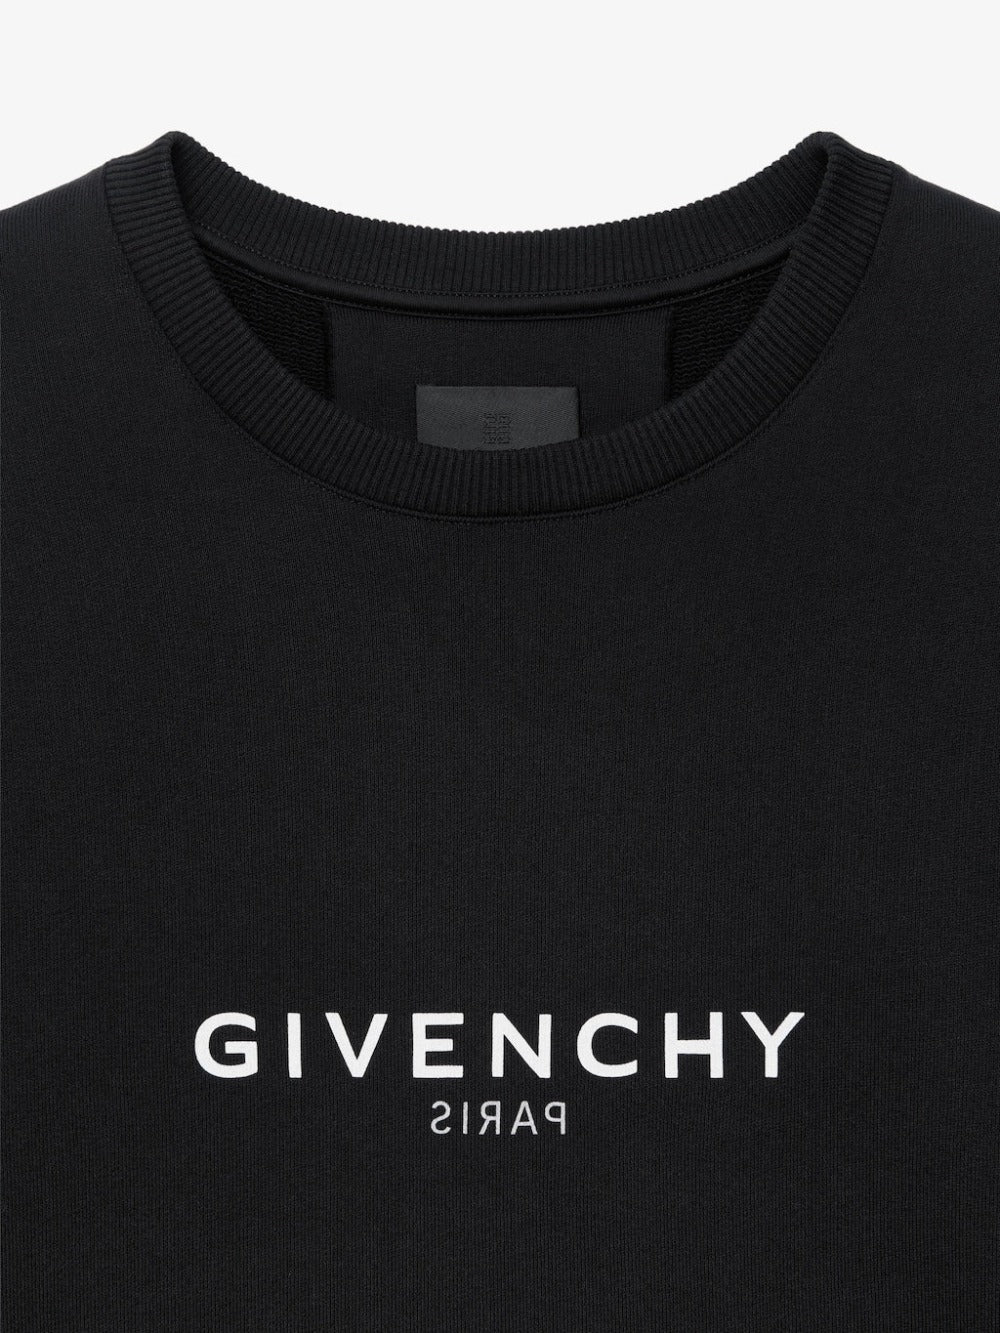 Givenchy Reverse Print Classic Fit Sweatshirt | Hype Vault Kuala Lumpur | Asia's Top Trusted High-End Sneakers and Streetwear Store